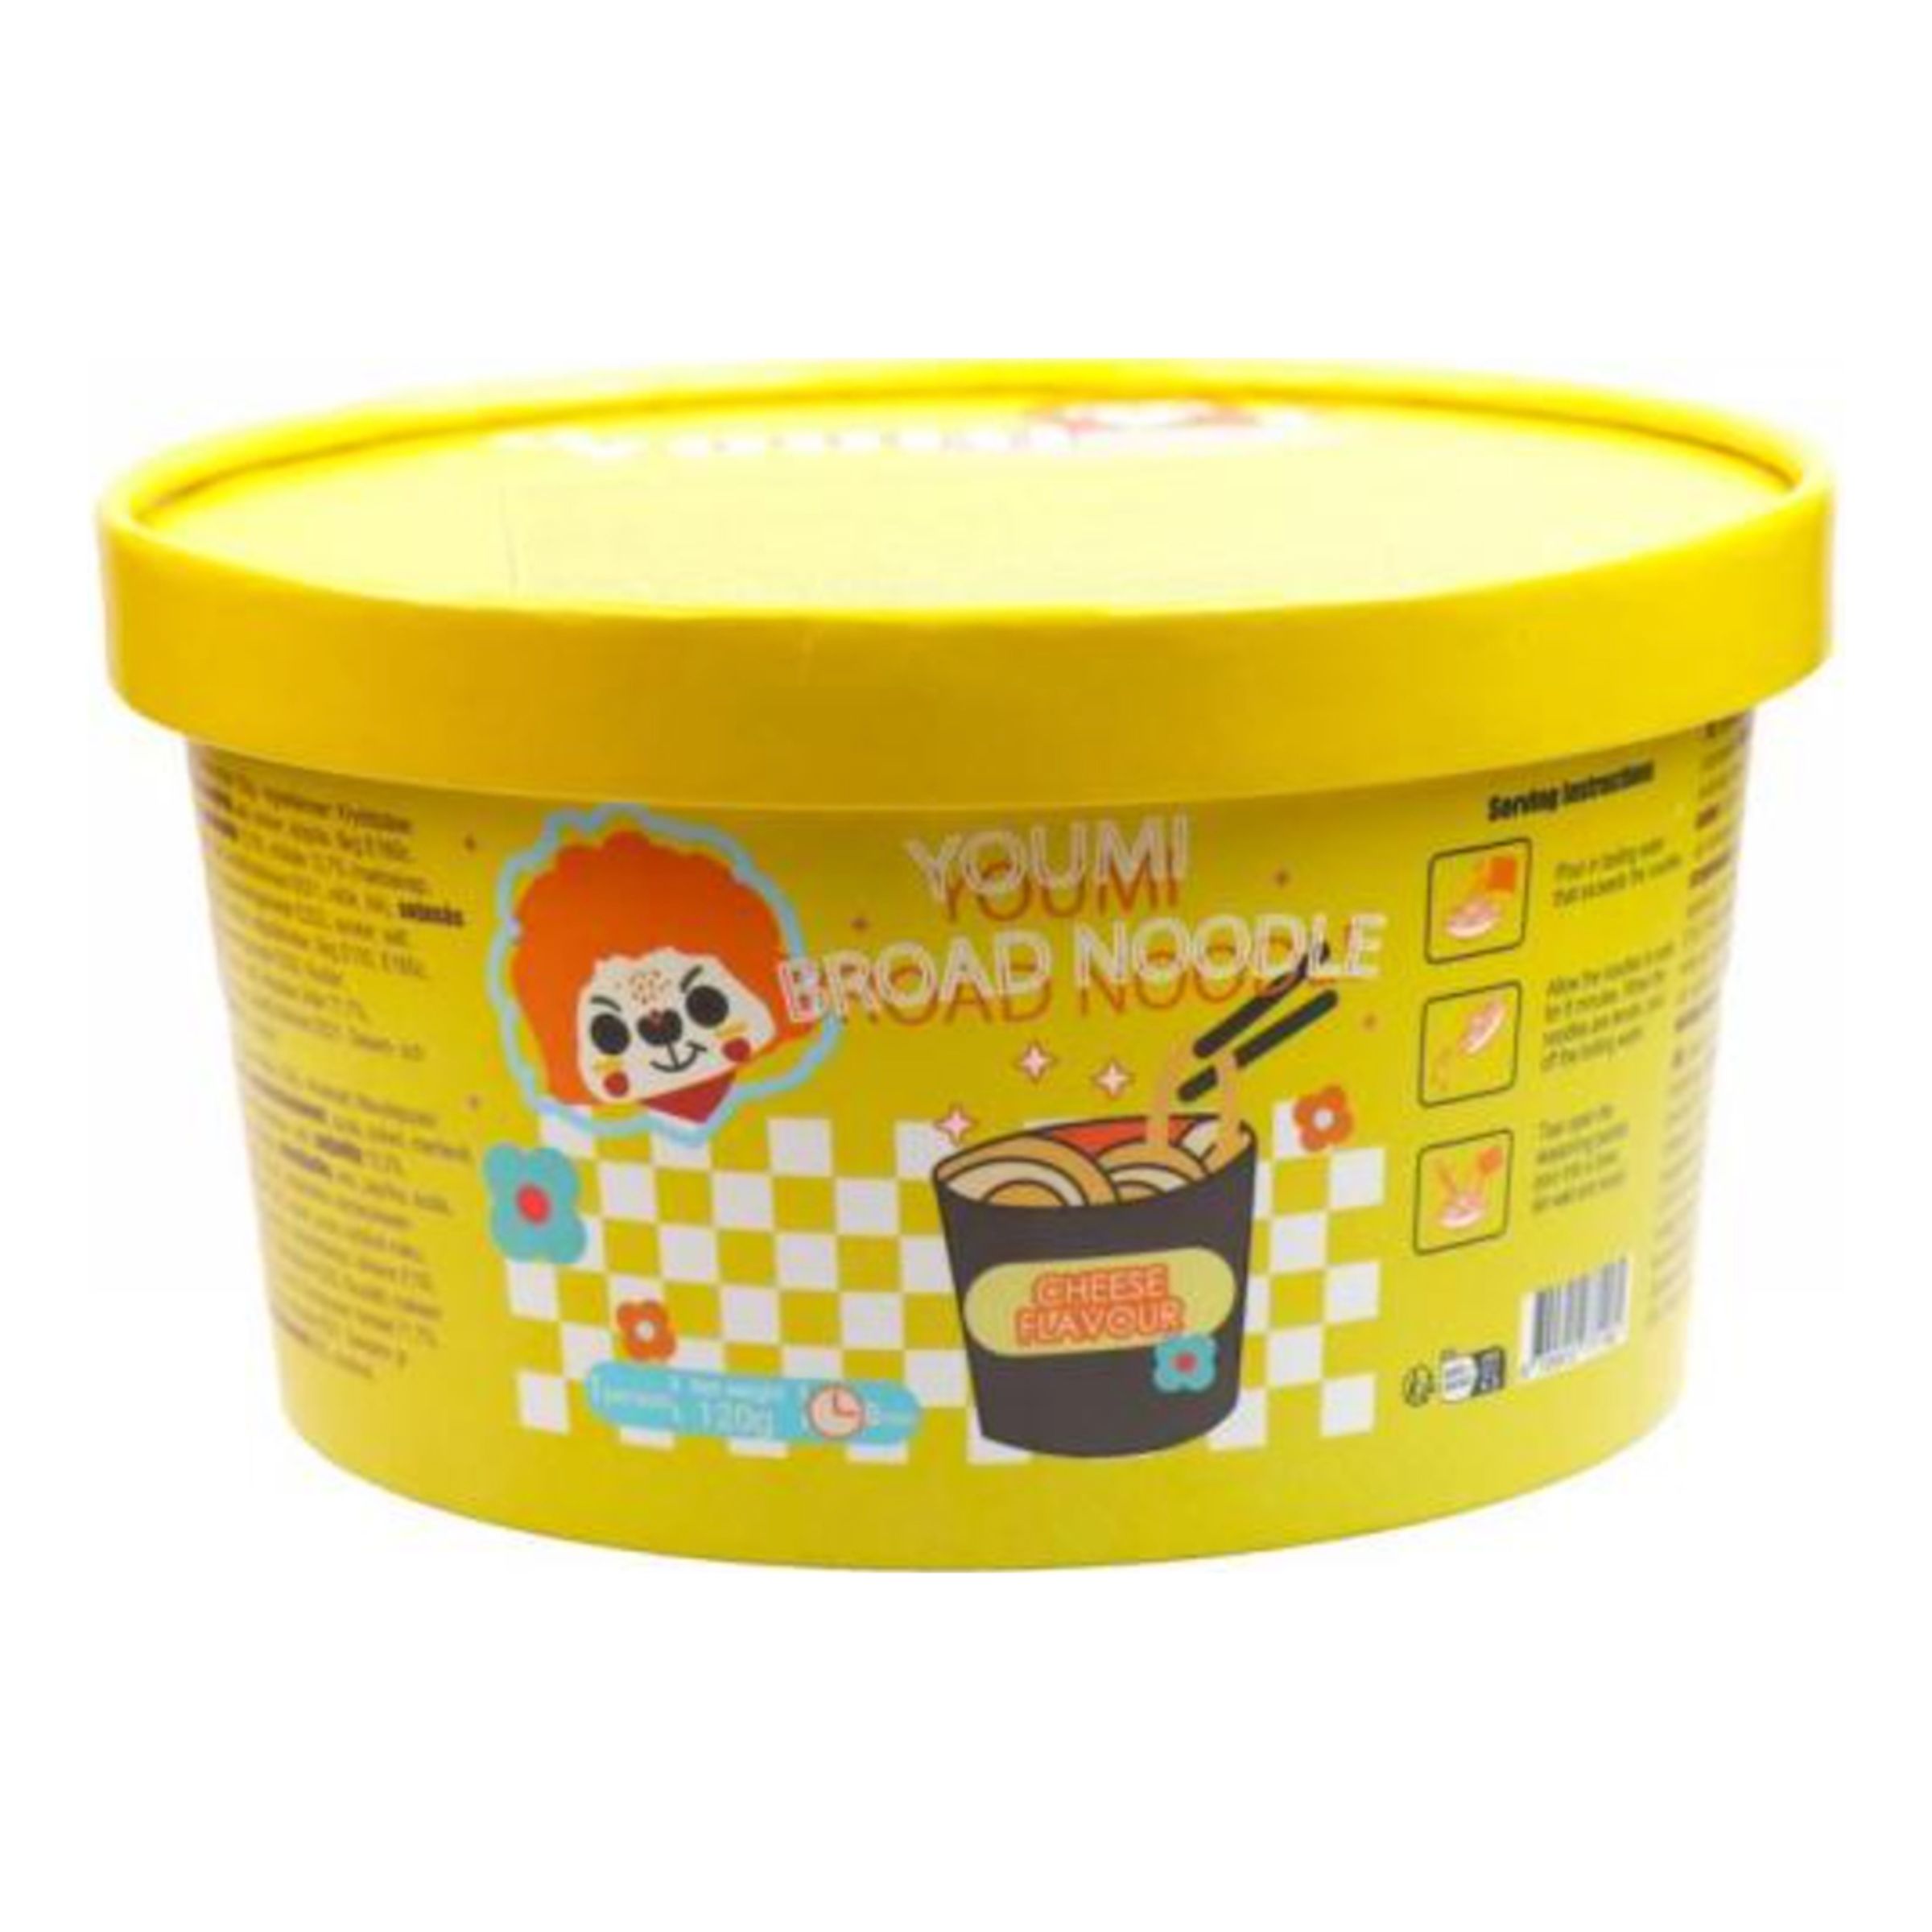 Läs mer om Youmi Instant Broad Noodle Cheese Flavour - 120 gram